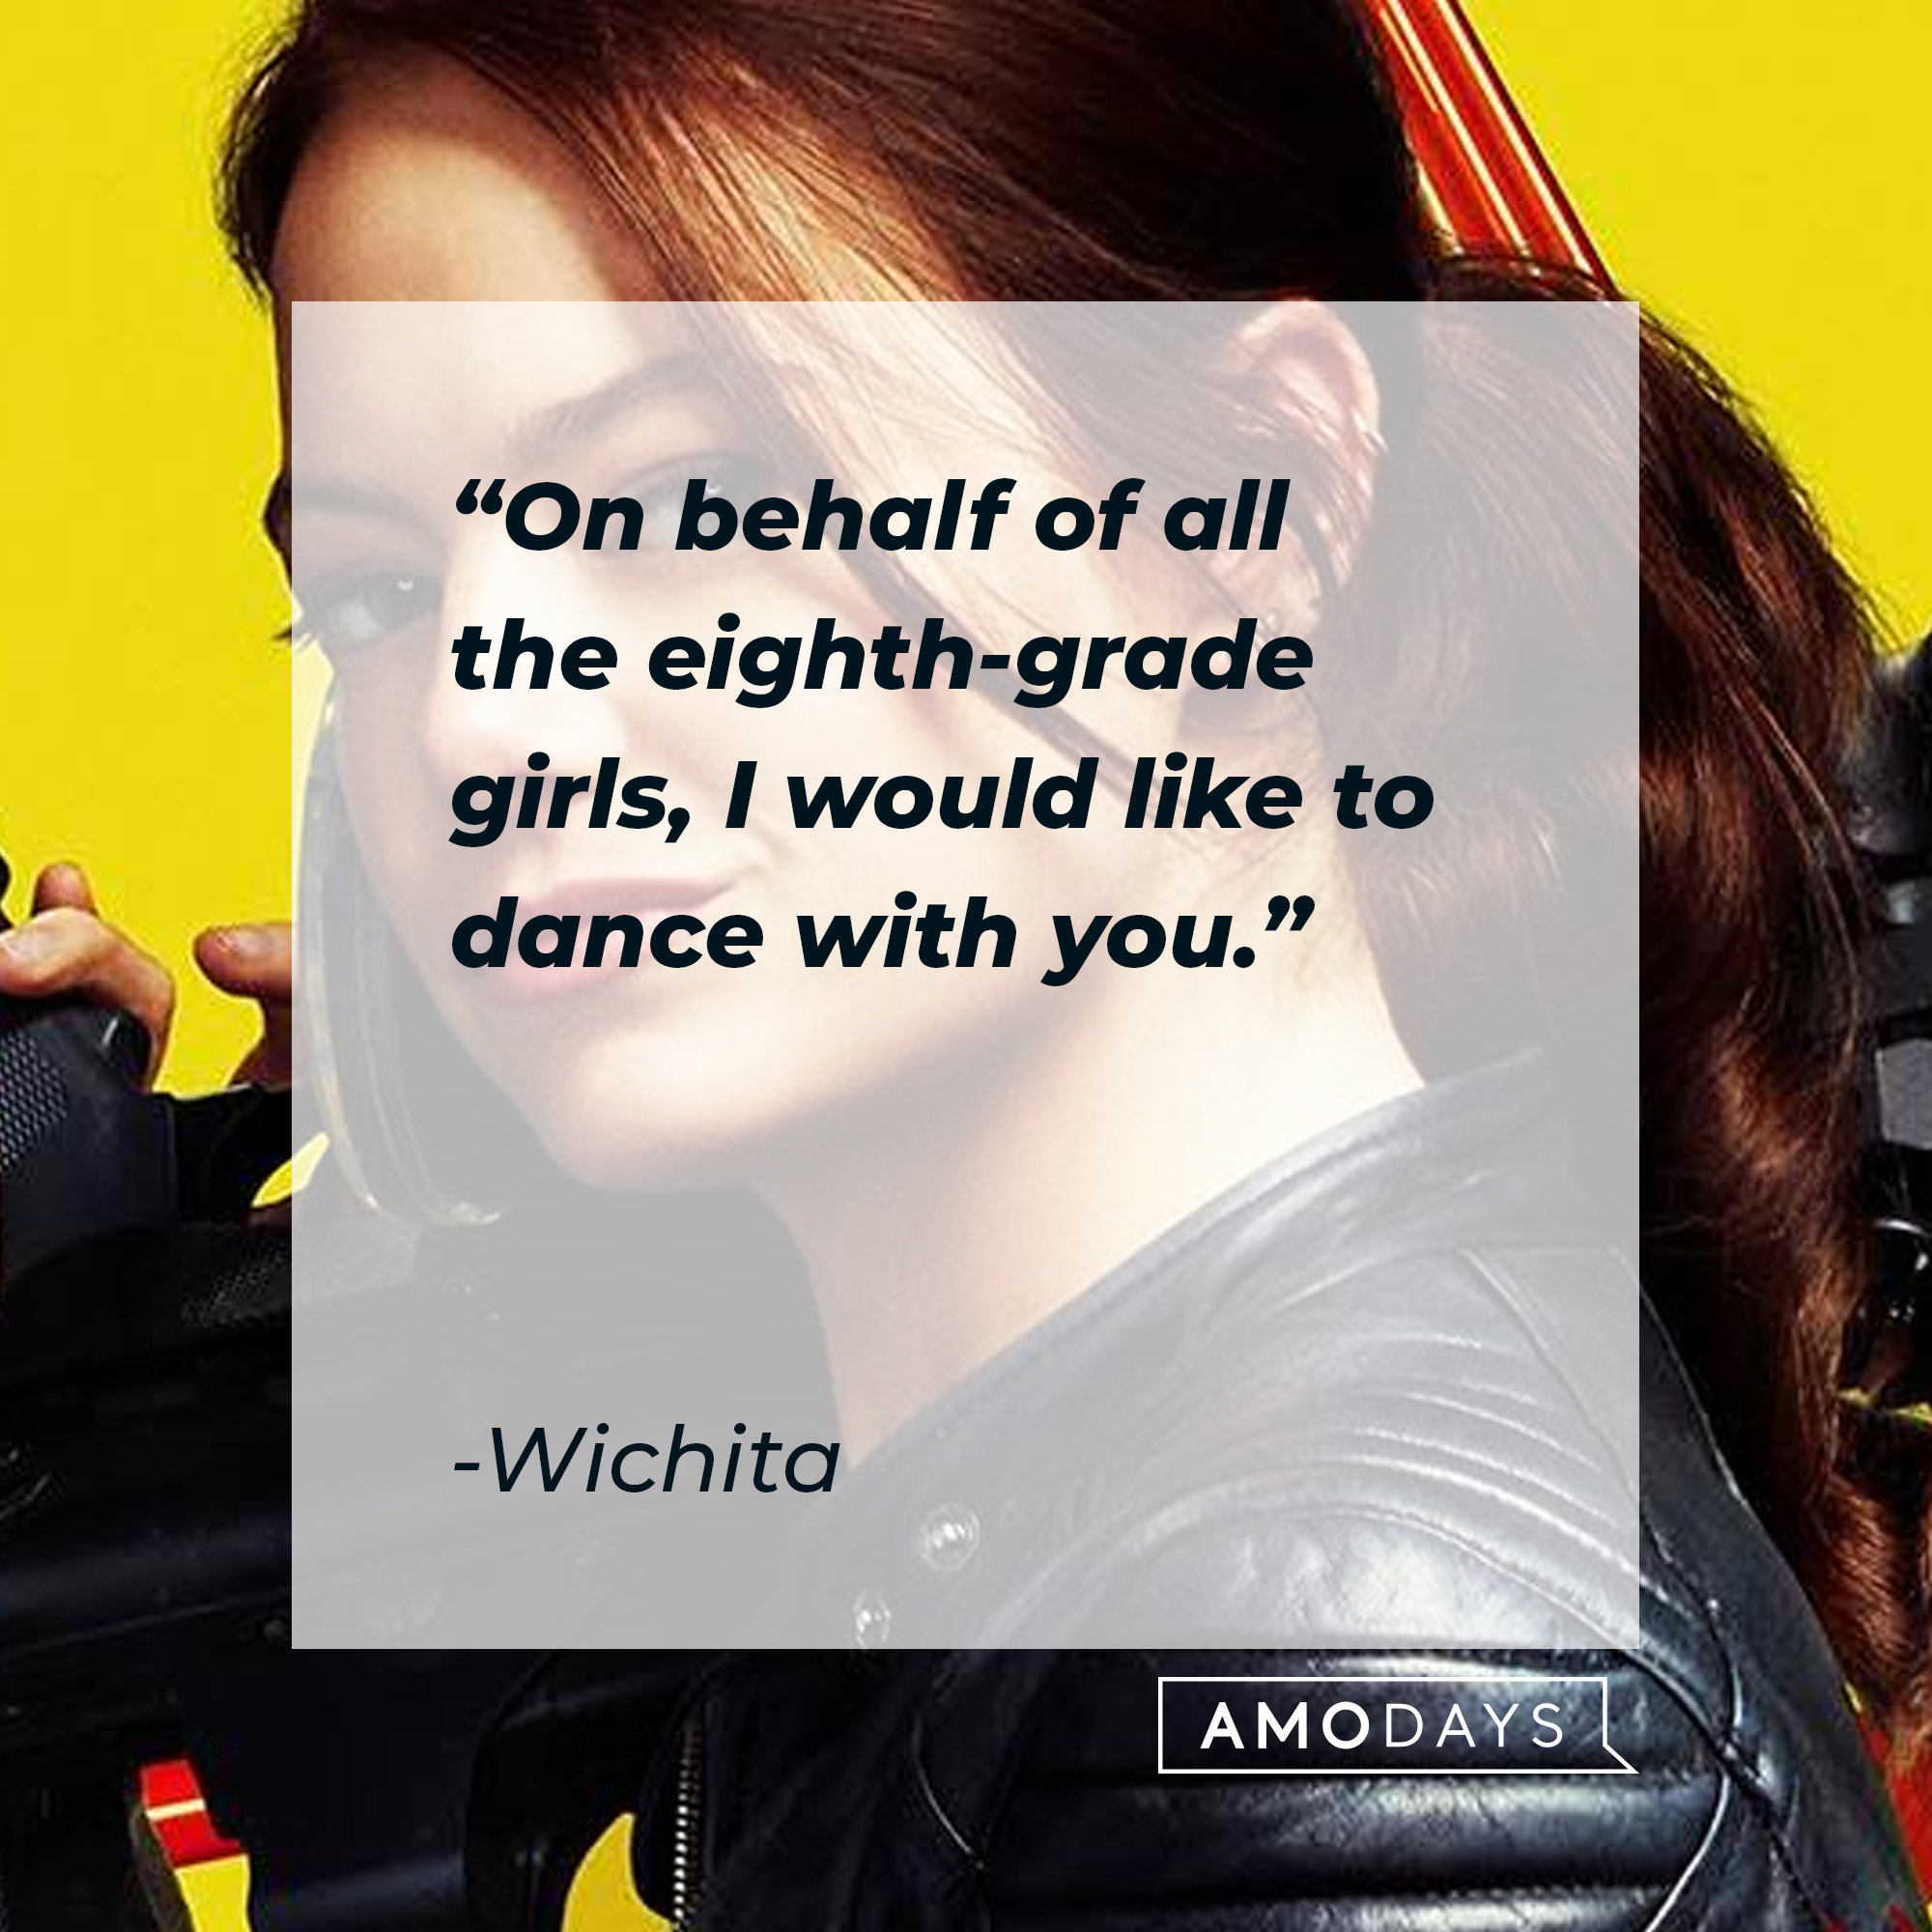 Wichita's quote: "On behalf of all the eighth-grade girls, I would like to dance with you." | Source: Facebook.com/Zombieland